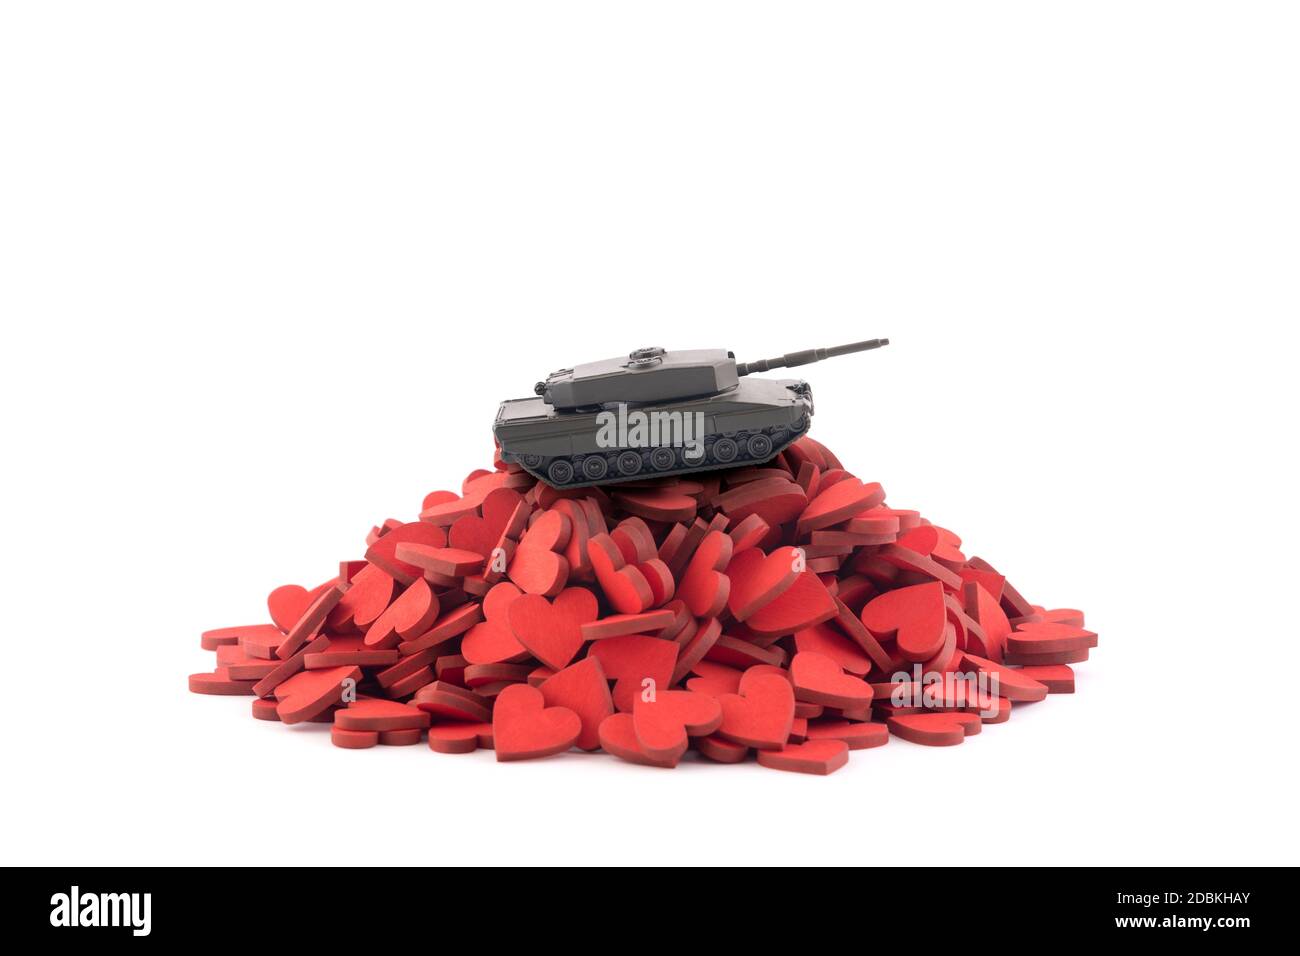 Tank on pile of hearts isolated on white background Stock Photo